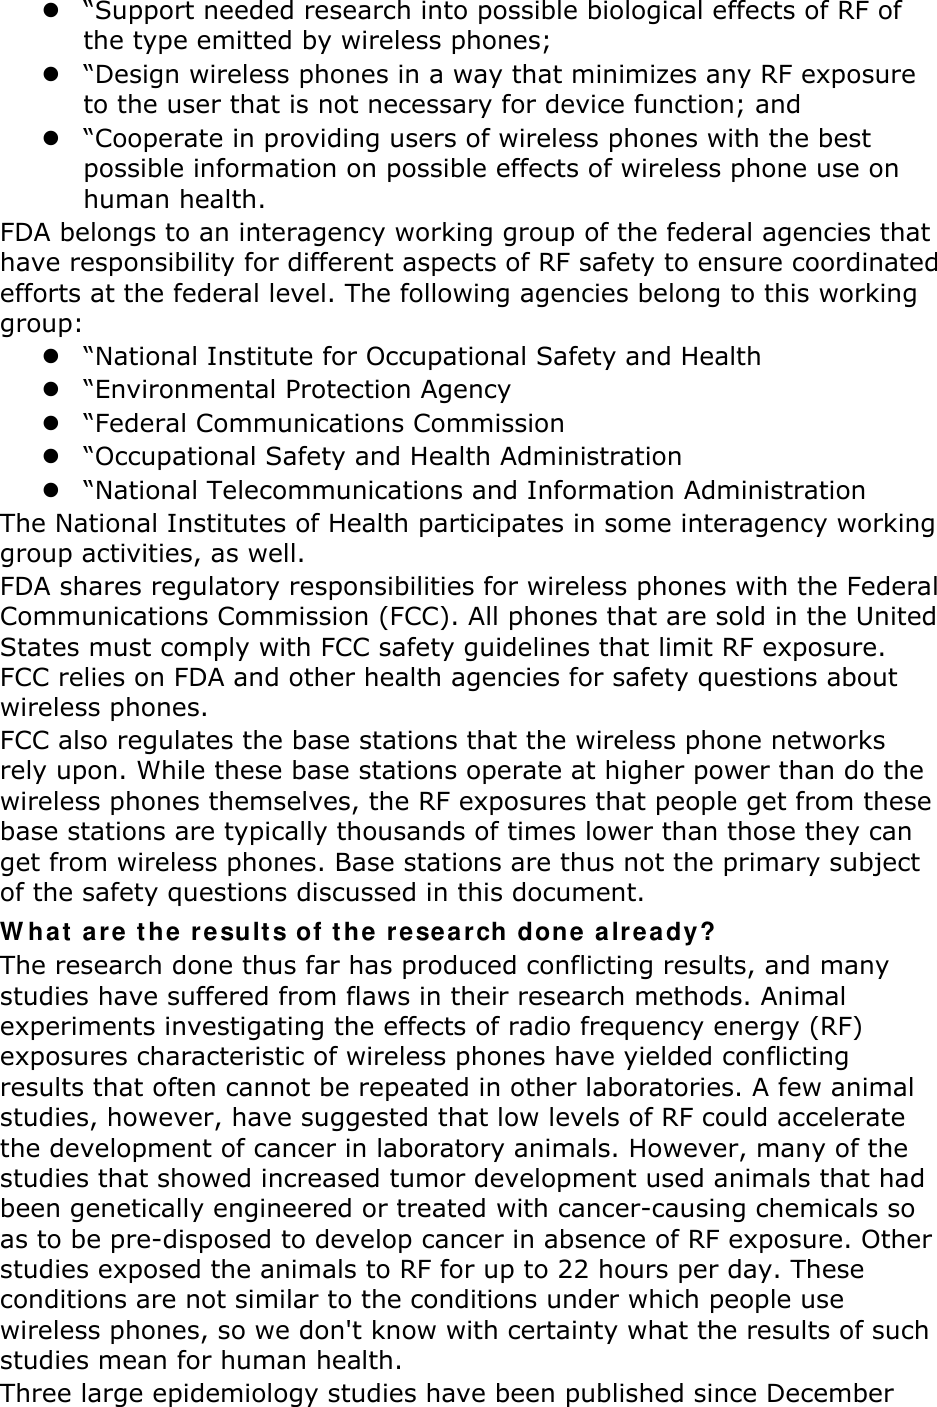  “Support needed research into possible biological effects of RF of the type emitted by wireless phones;  “Design wireless phones in a way that minimizes any RF exposure to the user that is not necessary for device function; and  “Cooperate in providing users of wireless phones with the best possible information on possible effects of wireless phone use on human health. FDA belongs to an interagency working group of the federal agencies that have responsibility for different aspects of RF safety to ensure coordinated efforts at the federal level. The following agencies belong to this working group:  “National Institute for Occupational Safety and Health  “Environmental Protection Agency  “Federal Communications Commission  “Occupational Safety and Health Administration  “National Telecommunications and Information Administration The National Institutes of Health participates in some interagency working group activities, as well. FDA shares regulatory responsibilities for wireless phones with the Federal Communications Commission (FCC). All phones that are sold in the United States must comply with FCC safety guidelines that limit RF exposure. FCC relies on FDA and other health agencies for safety questions about wireless phones. FCC also regulates the base stations that the wireless phone networks rely upon. While these base stations operate at higher power than do the wireless phones themselves, the RF exposures that people get from these base stations are typically thousands of times lower than those they can get from wireless phones. Base stations are thus not the primary subject of the safety questions discussed in this document. W hat  are  t he result s of t h e rese a rch done a lre a dy? The research done thus far has produced conflicting results, and many studies have suffered from flaws in their research methods. Animal experiments investigating the effects of radio frequency energy (RF) exposures characteristic of wireless phones have yielded conflicting results that often cannot be repeated in other laboratories. A few animal studies, however, have suggested that low levels of RF could accelerate the development of cancer in laboratory animals. However, many of the studies that showed increased tumor development used animals that had been genetically engineered or treated with cancer-causing chemicals so as to be pre-disposed to develop cancer in absence of RF exposure. Other studies exposed the animals to RF for up to 22 hours per day. These conditions are not similar to the conditions under which people use wireless phones, so we don&apos;t know with certainty what the results of such studies mean for human health. Three large epidemiology studies have been published since December 